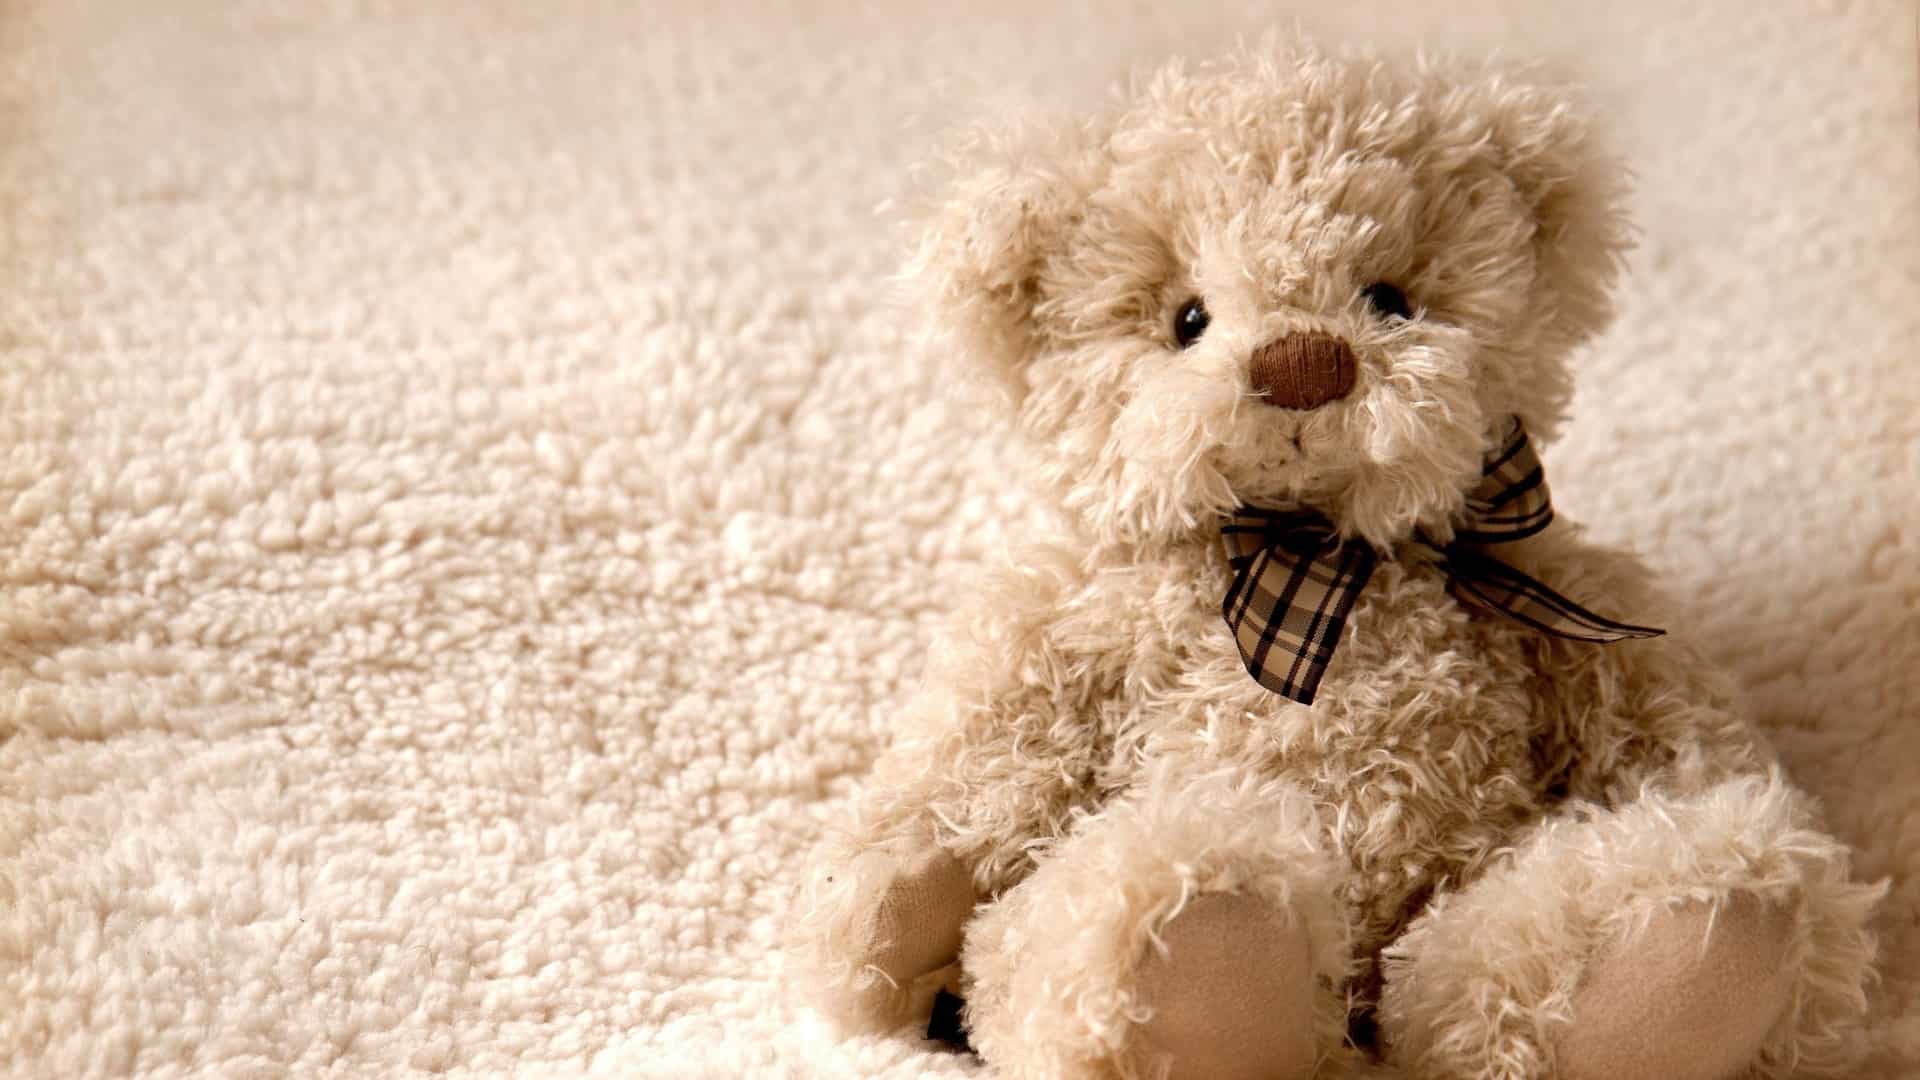 Teddy Day Images for Husband